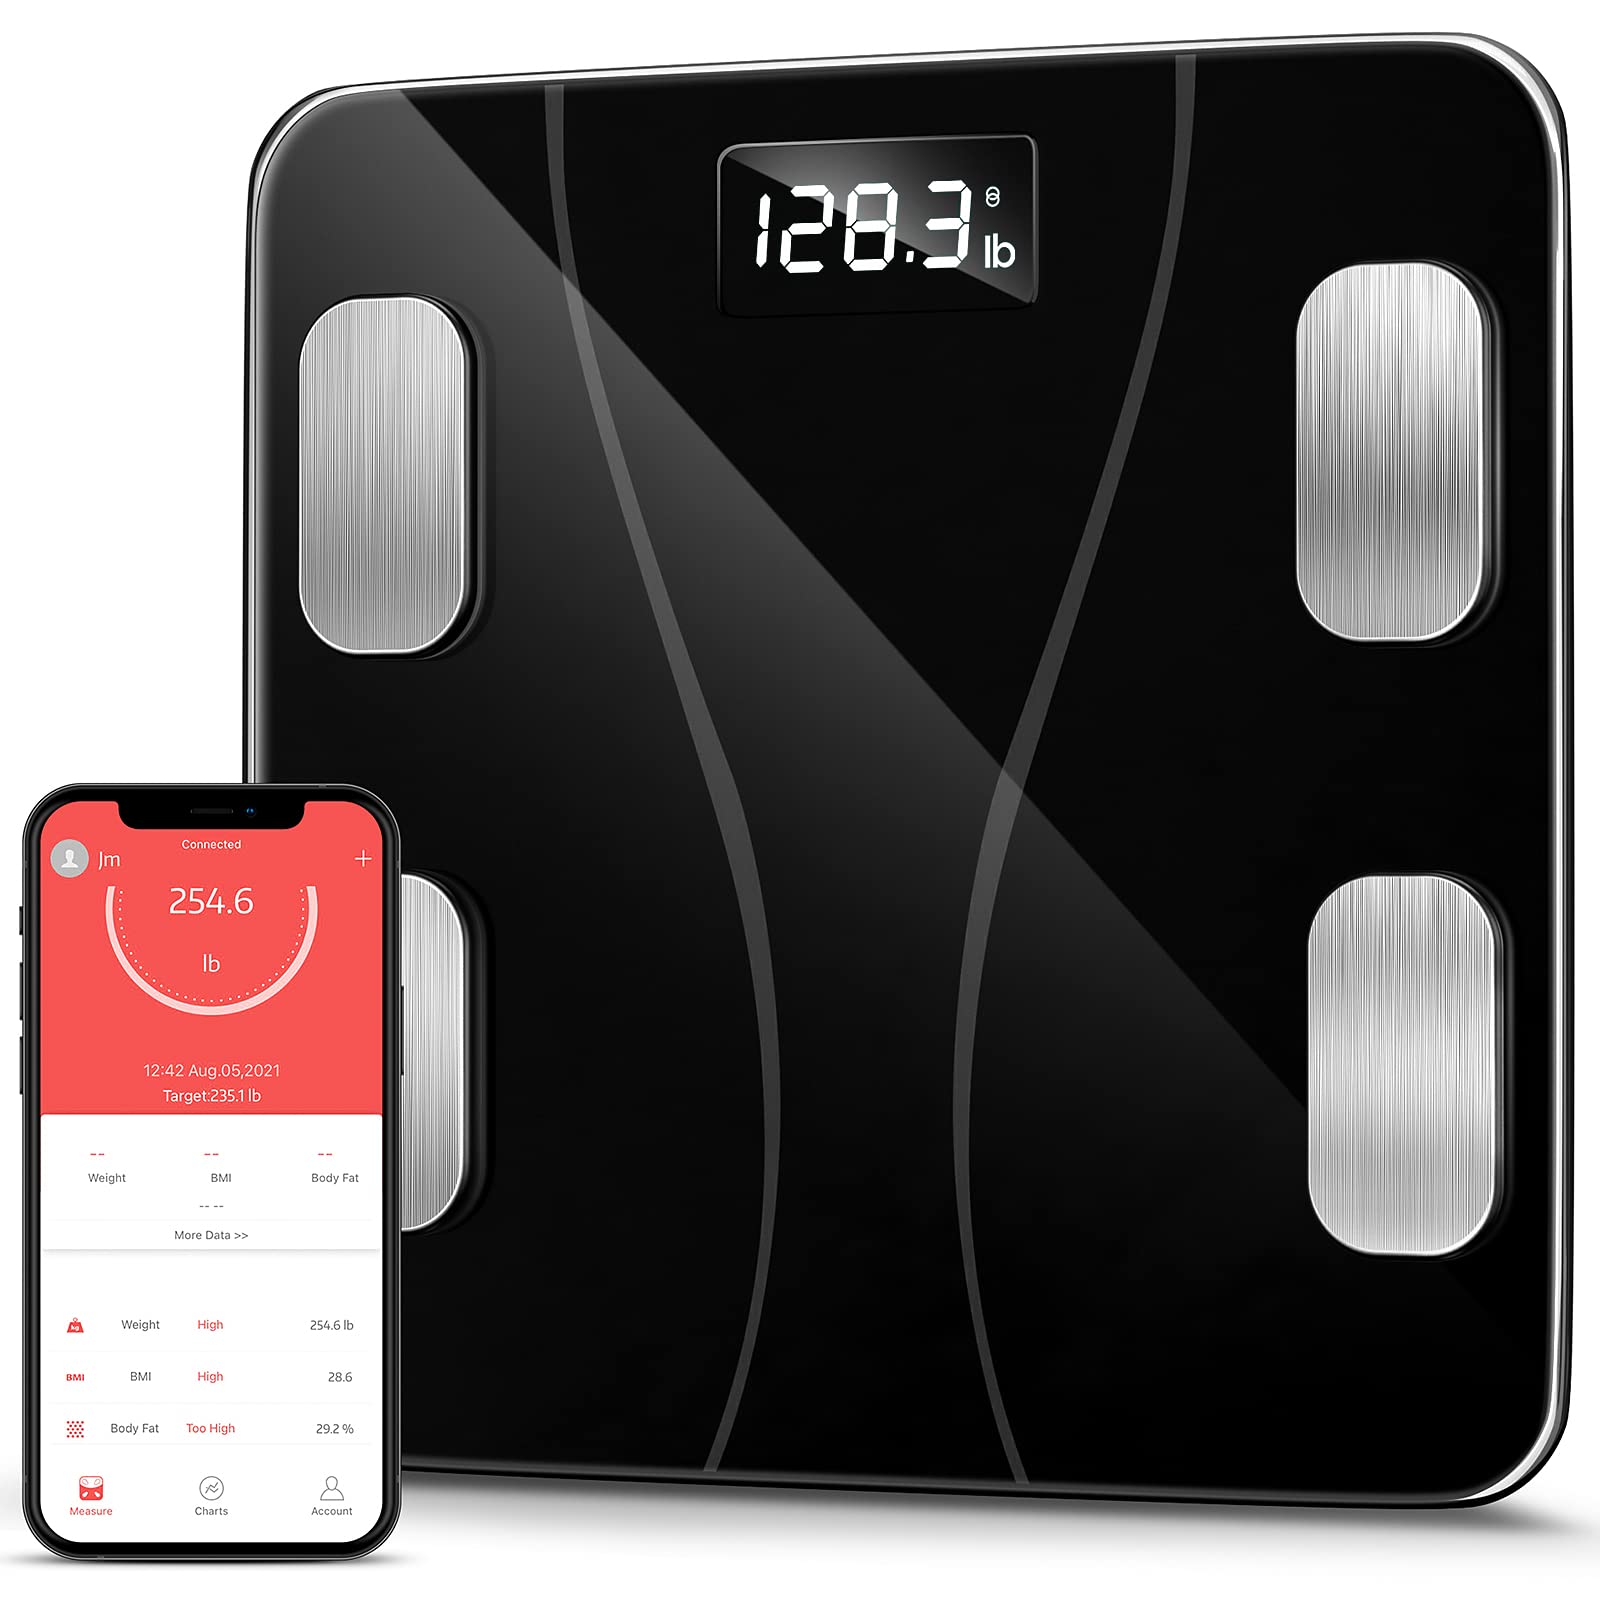 Bluetooth Body Scale - Smart Body Scale with Mobile App Weight Monitoring White